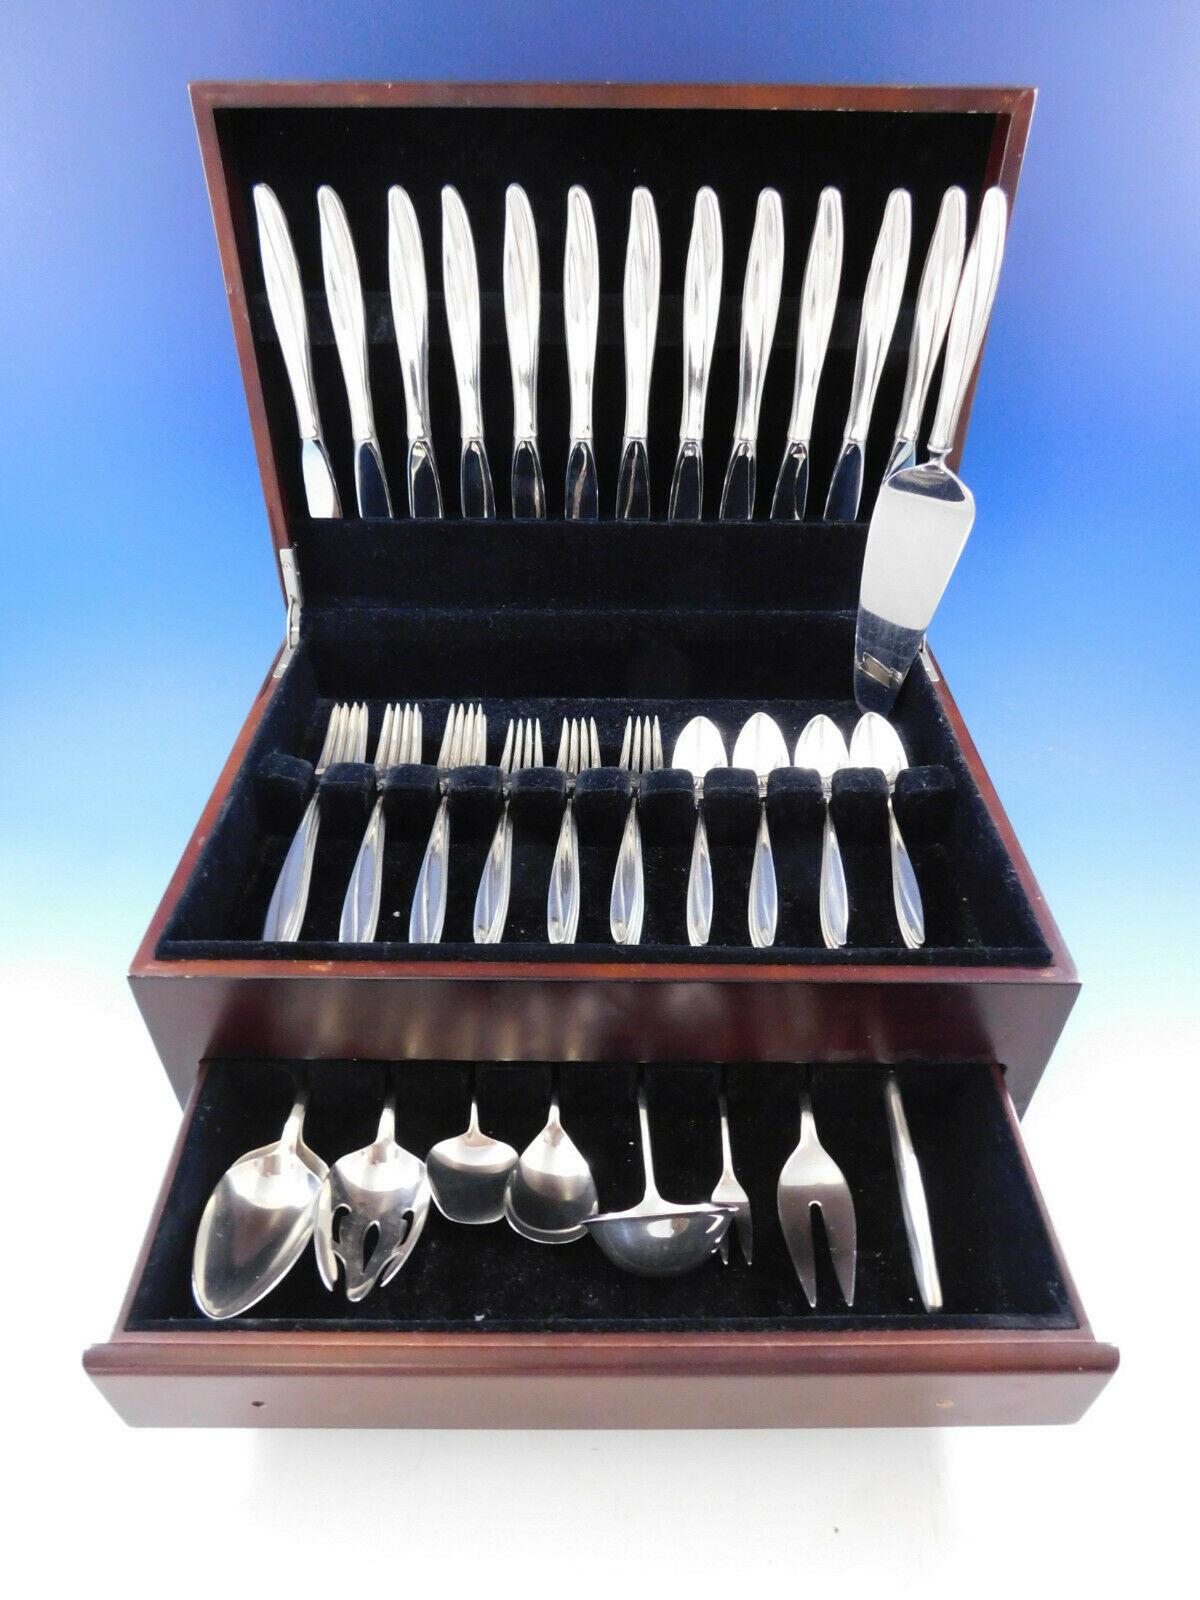 Mid-Century Modern Firelight by Gorham circa 1959 Sterling Silver flatware set - 57 pieces. This set includes:

12 knives, 9